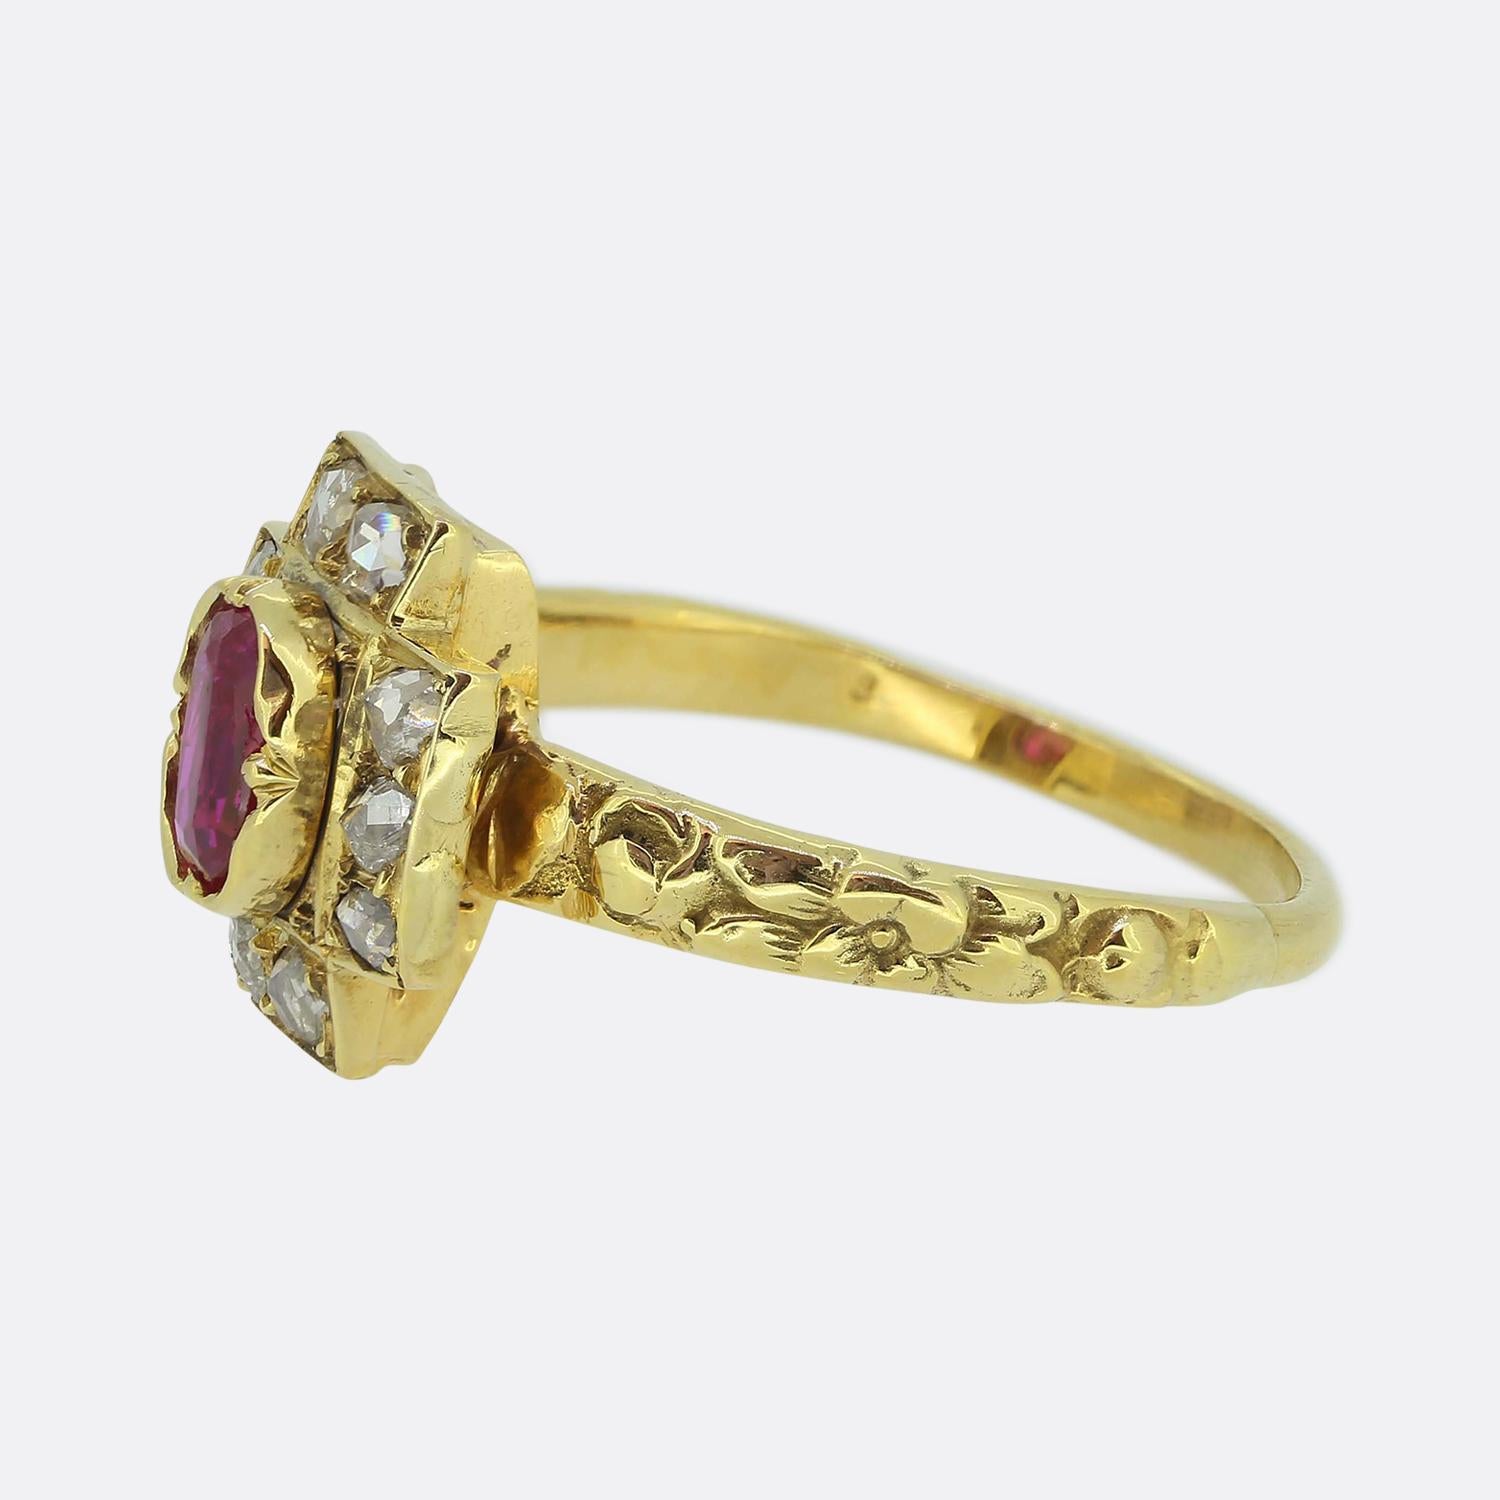 Here we have a beautiful cluster ring taken from the Victoria era. This antique piece has been crafted from a rich 18ct yellow gold and showcases an oval faceted vivid red ruby with a pinky undertone at the centre of the face. This principal stone